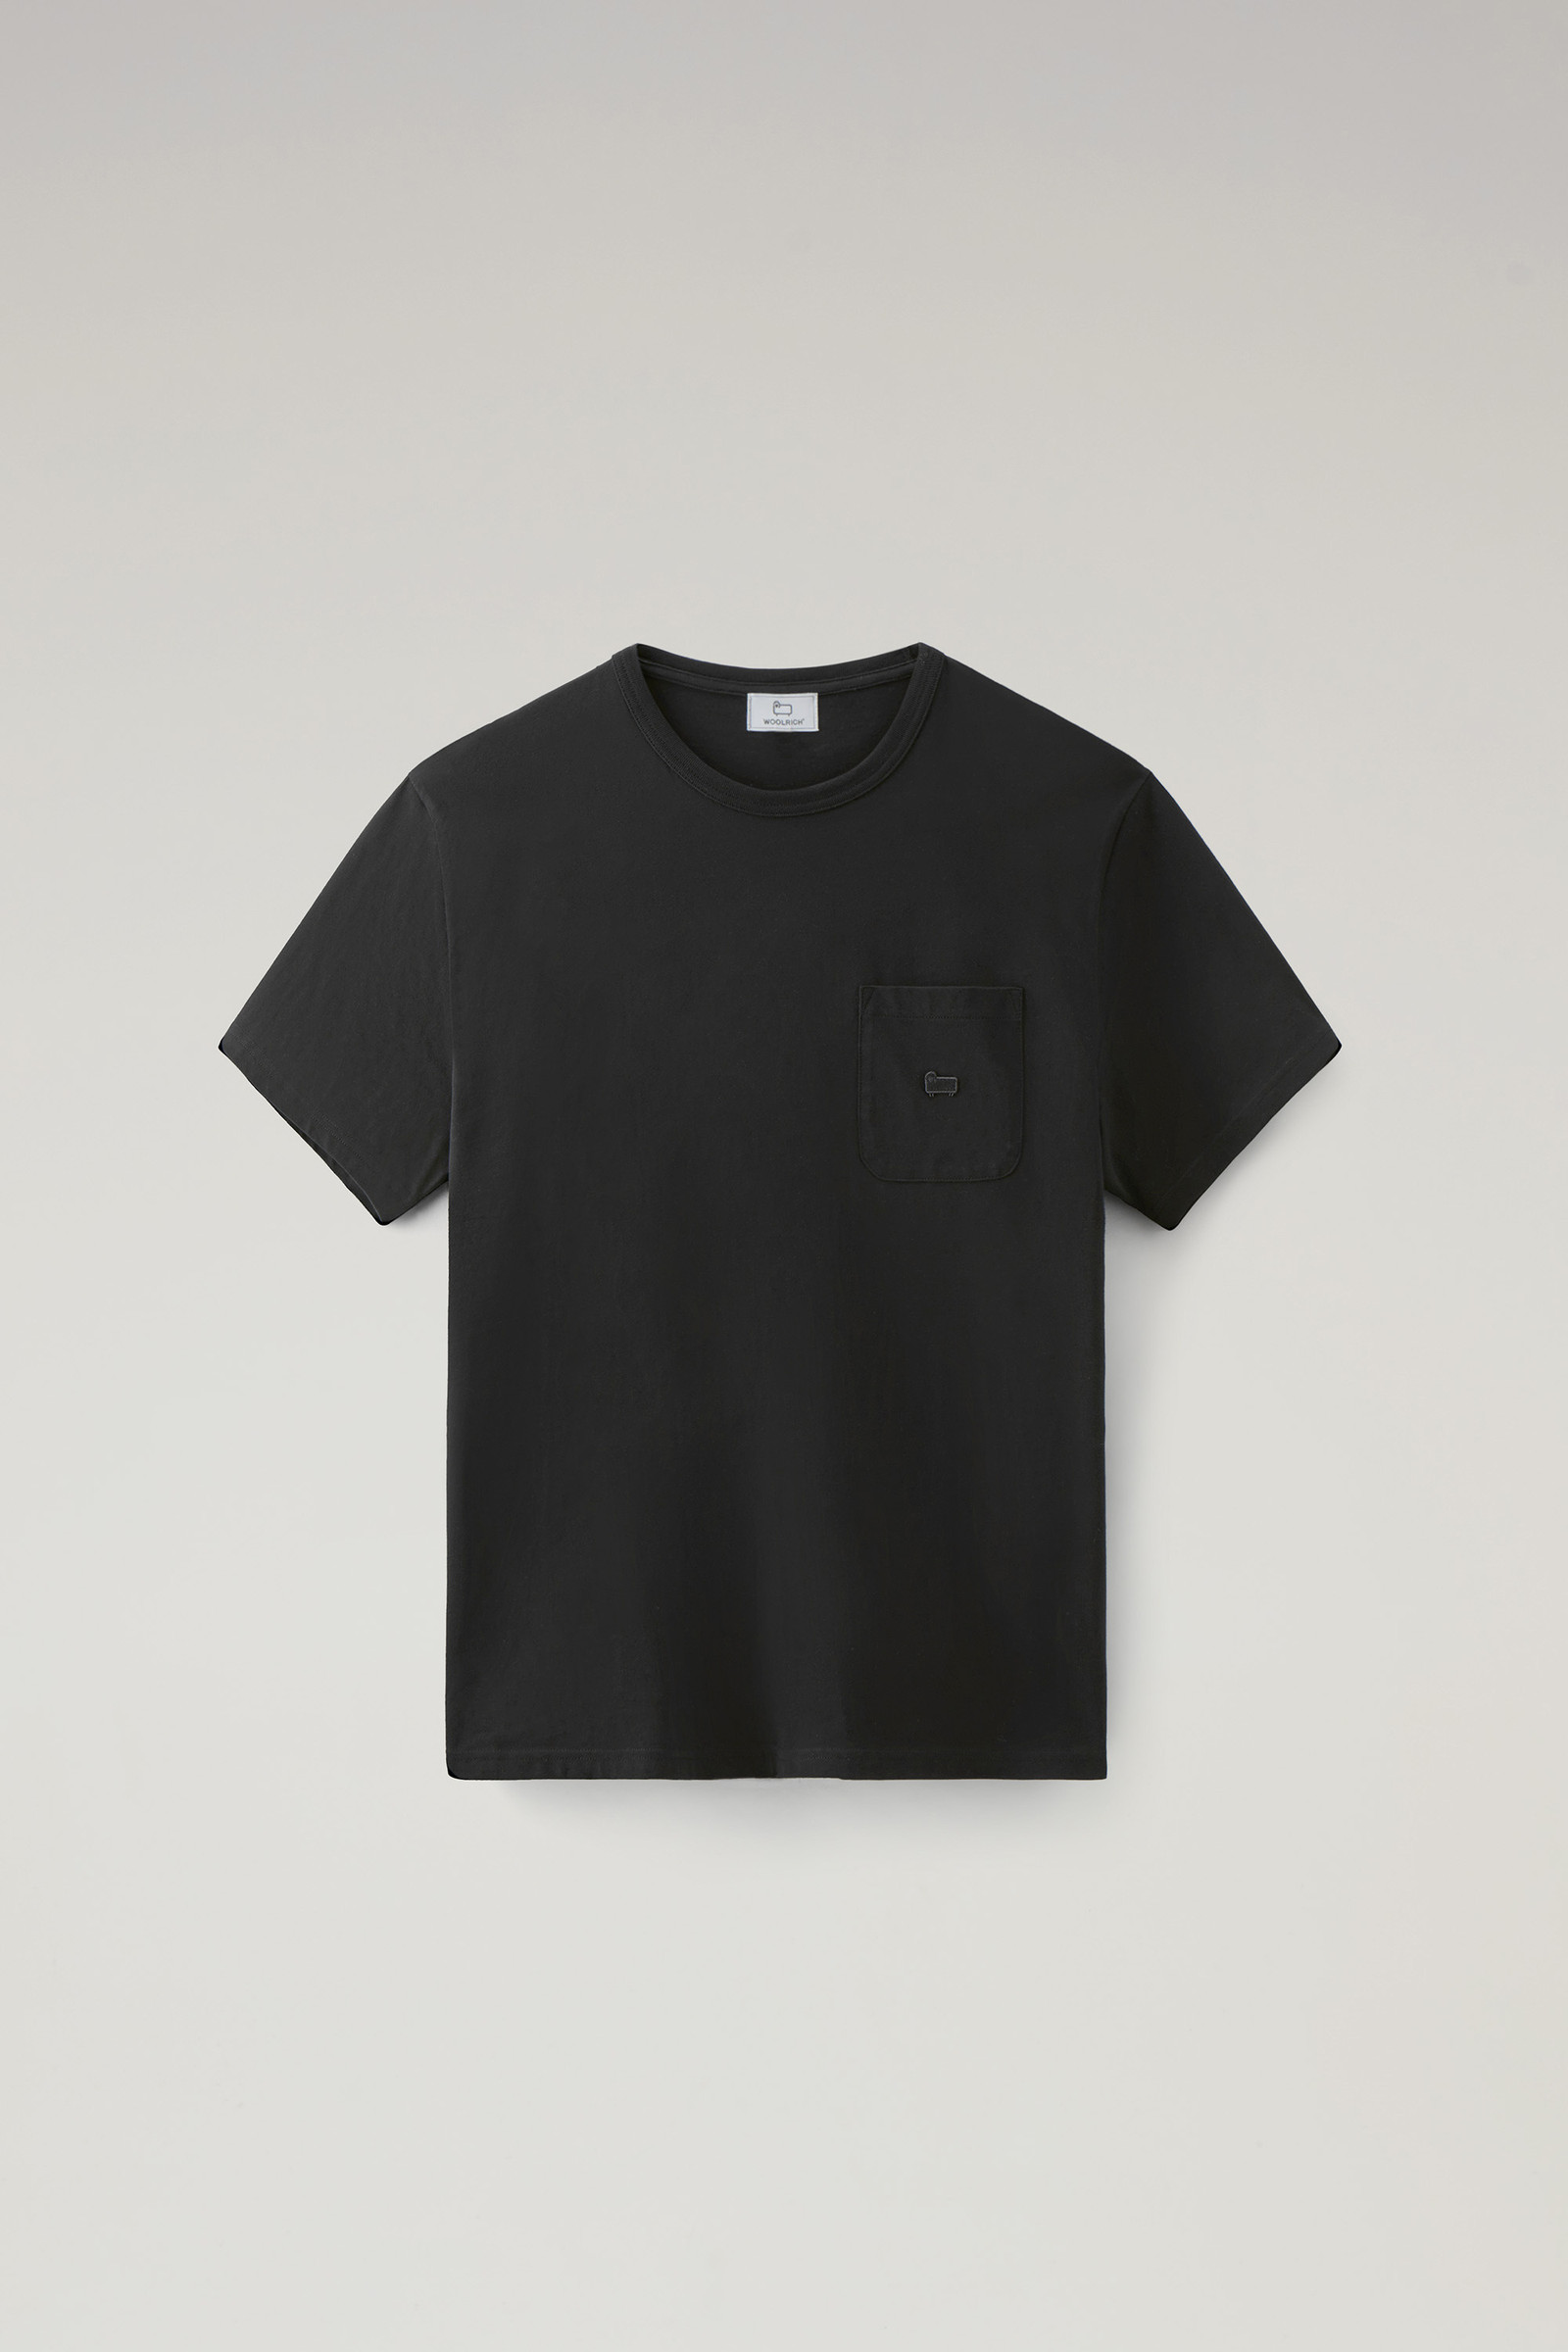 T-shirt in Pure Cotton with Chest Pocket Black